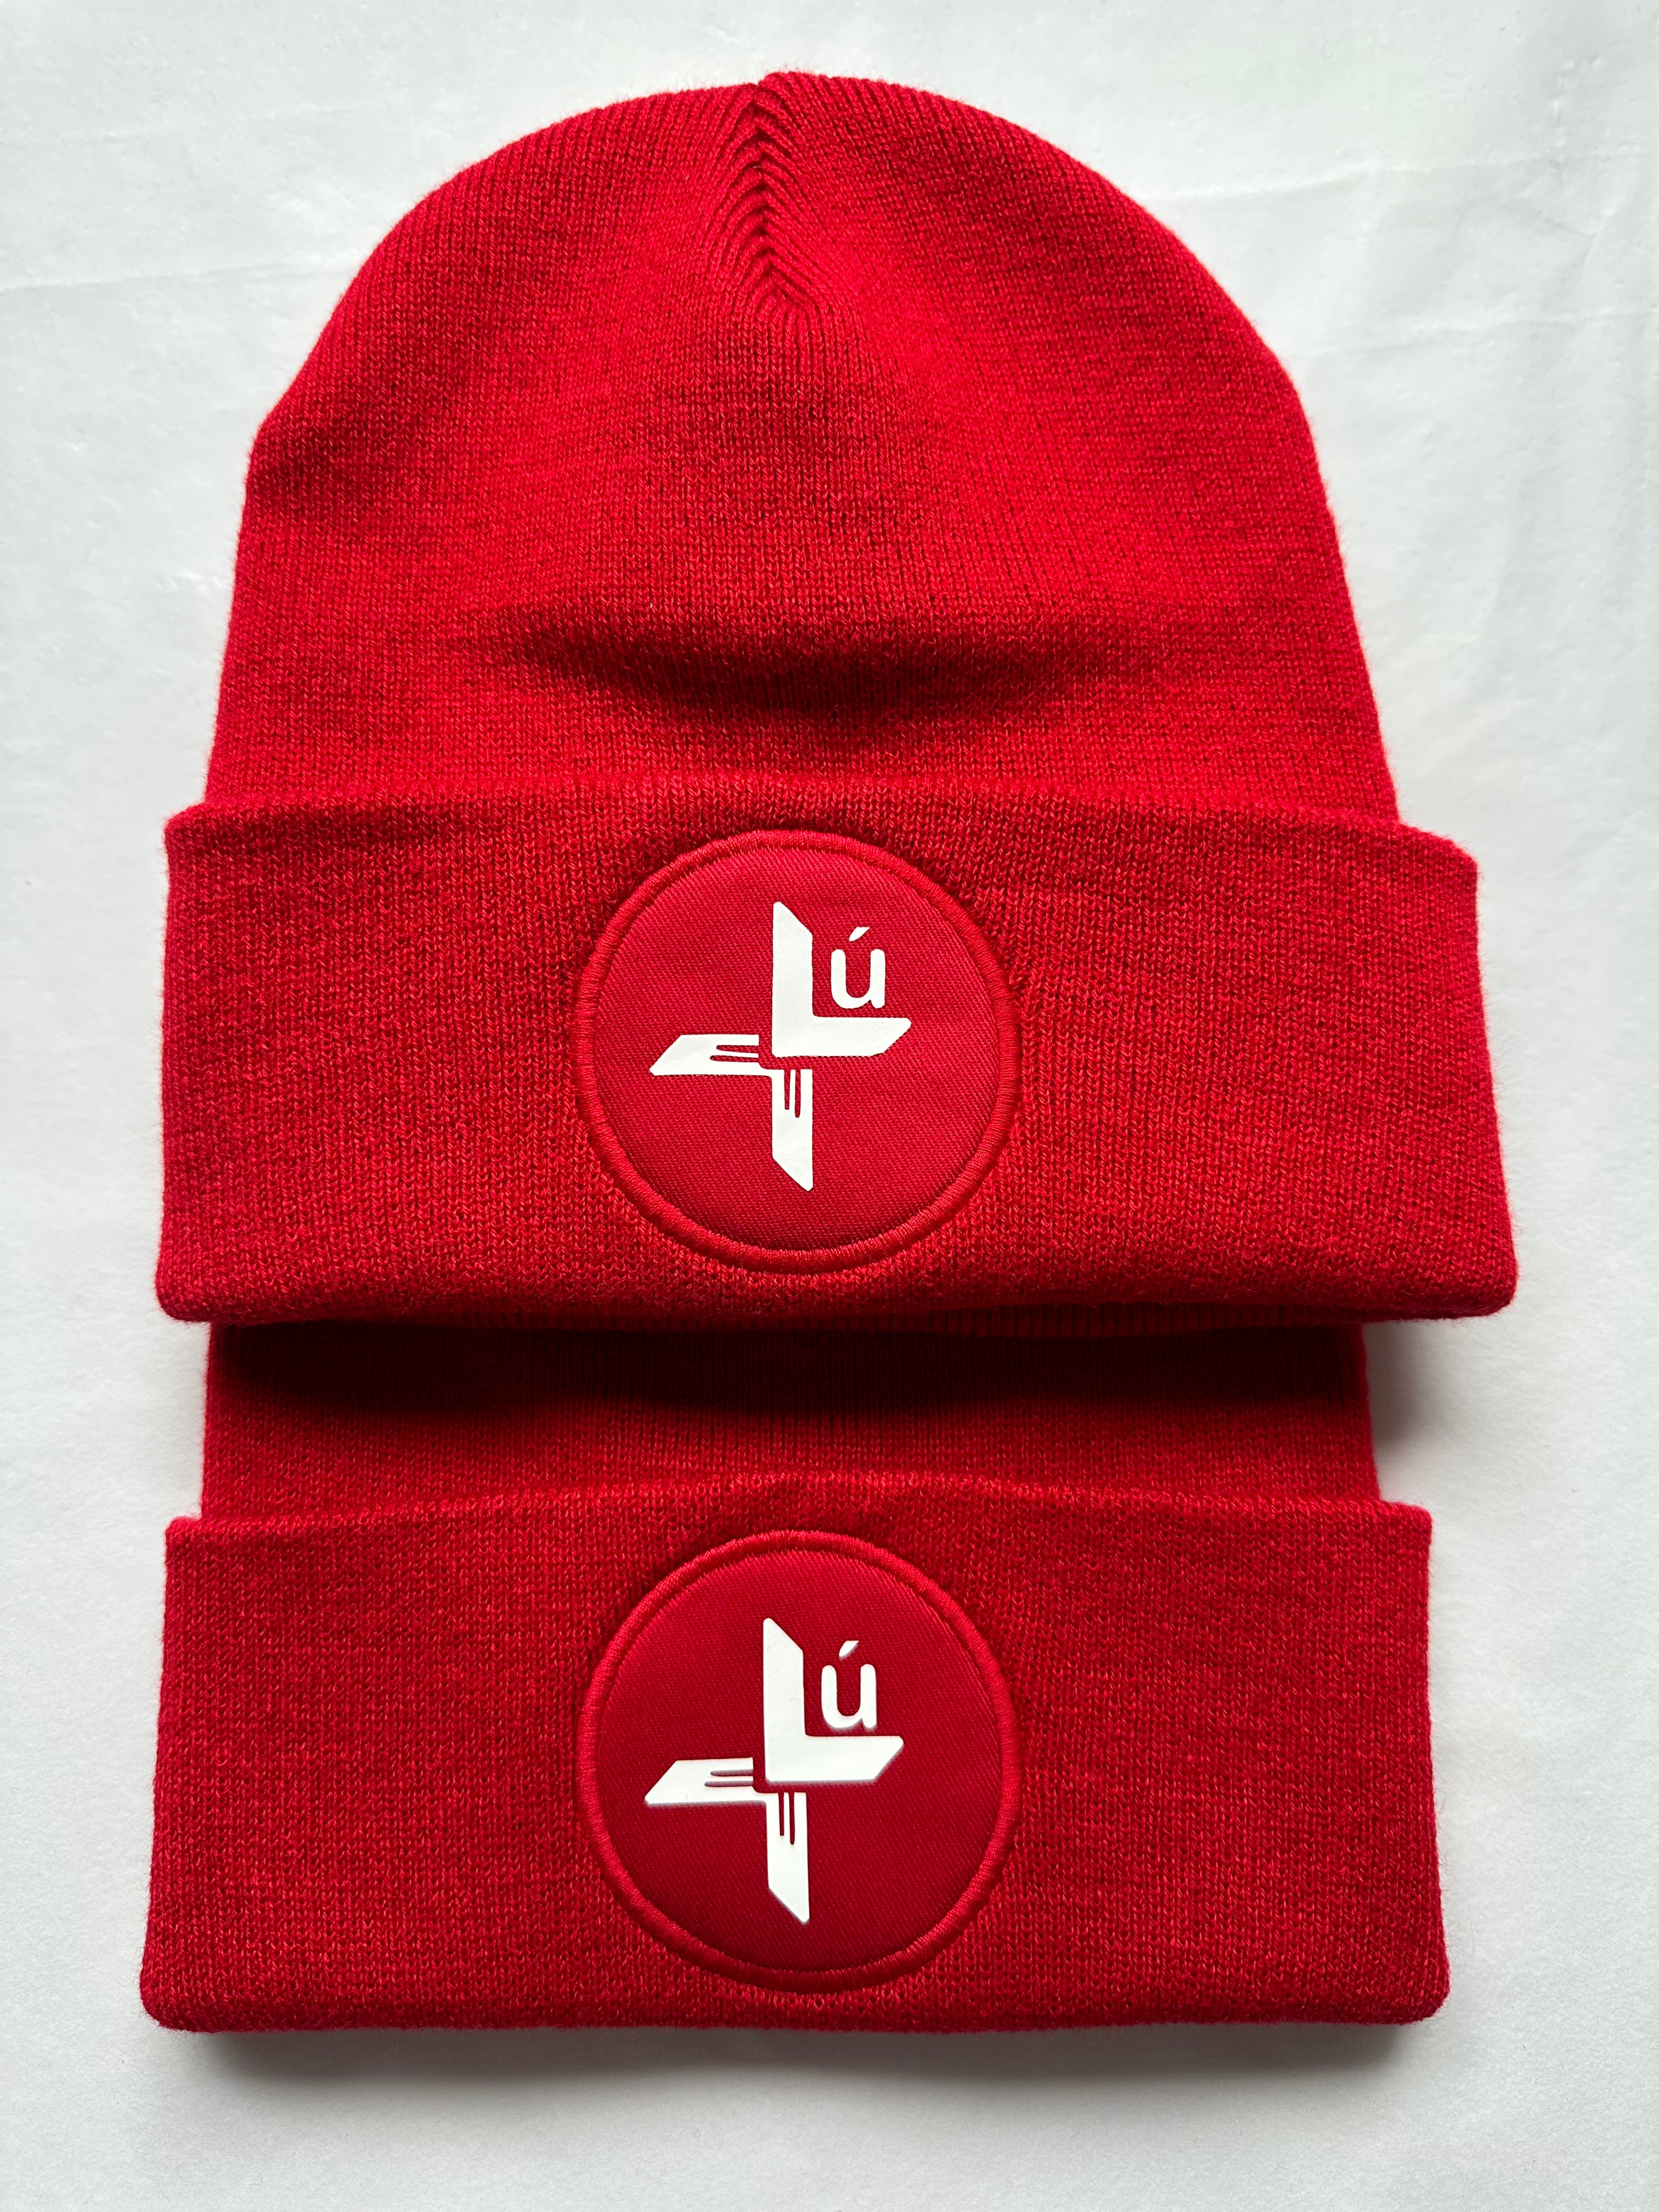 Lú Louth Supporters Beanie Hat | Phoenix